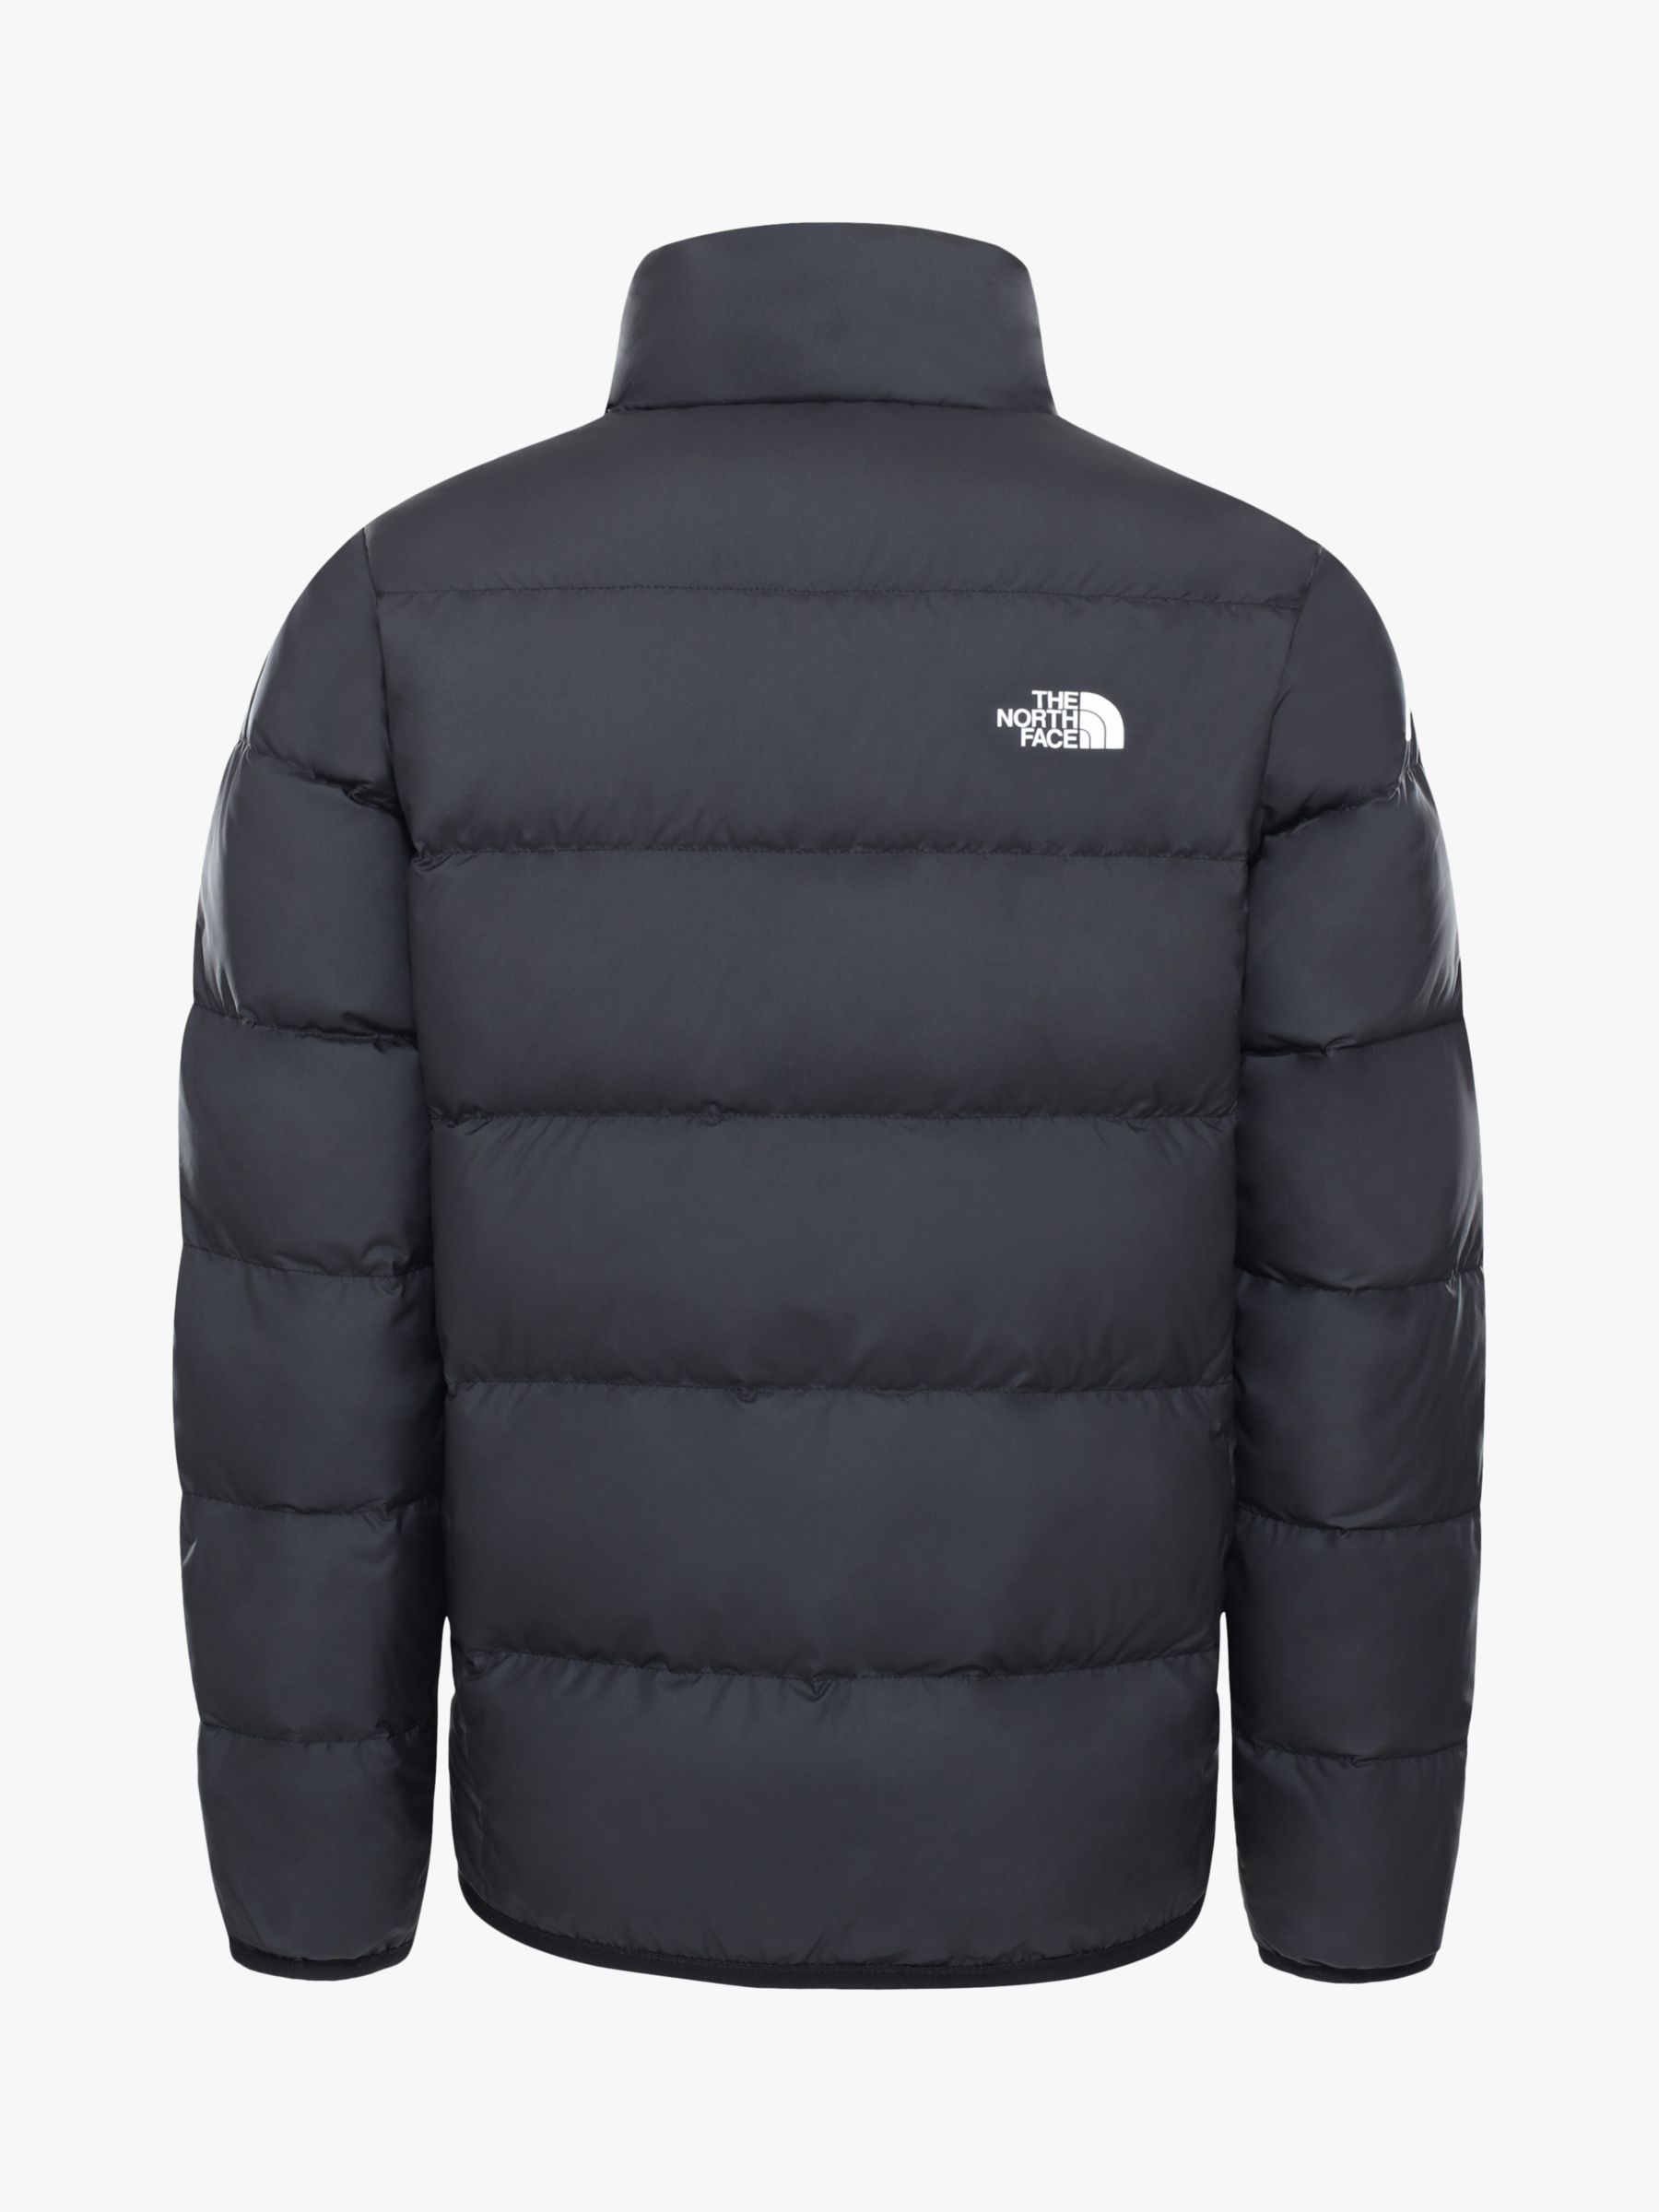 The North Face Kids' Reverse Andes Puffer Jacket, Black at John Lewis ...